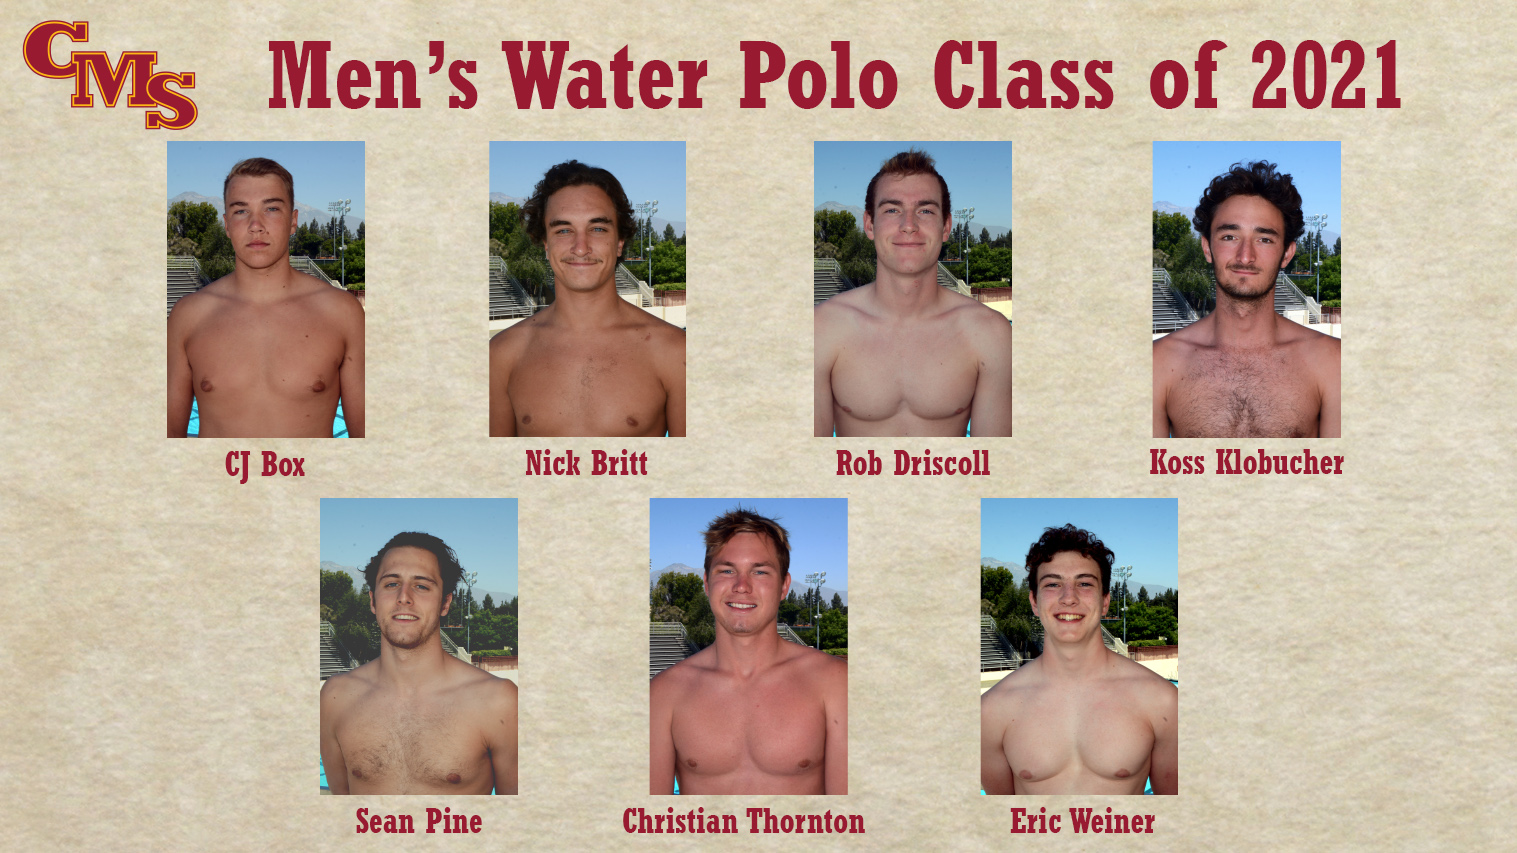 Head shots of the CMS Men's Water Polo Class of 2021